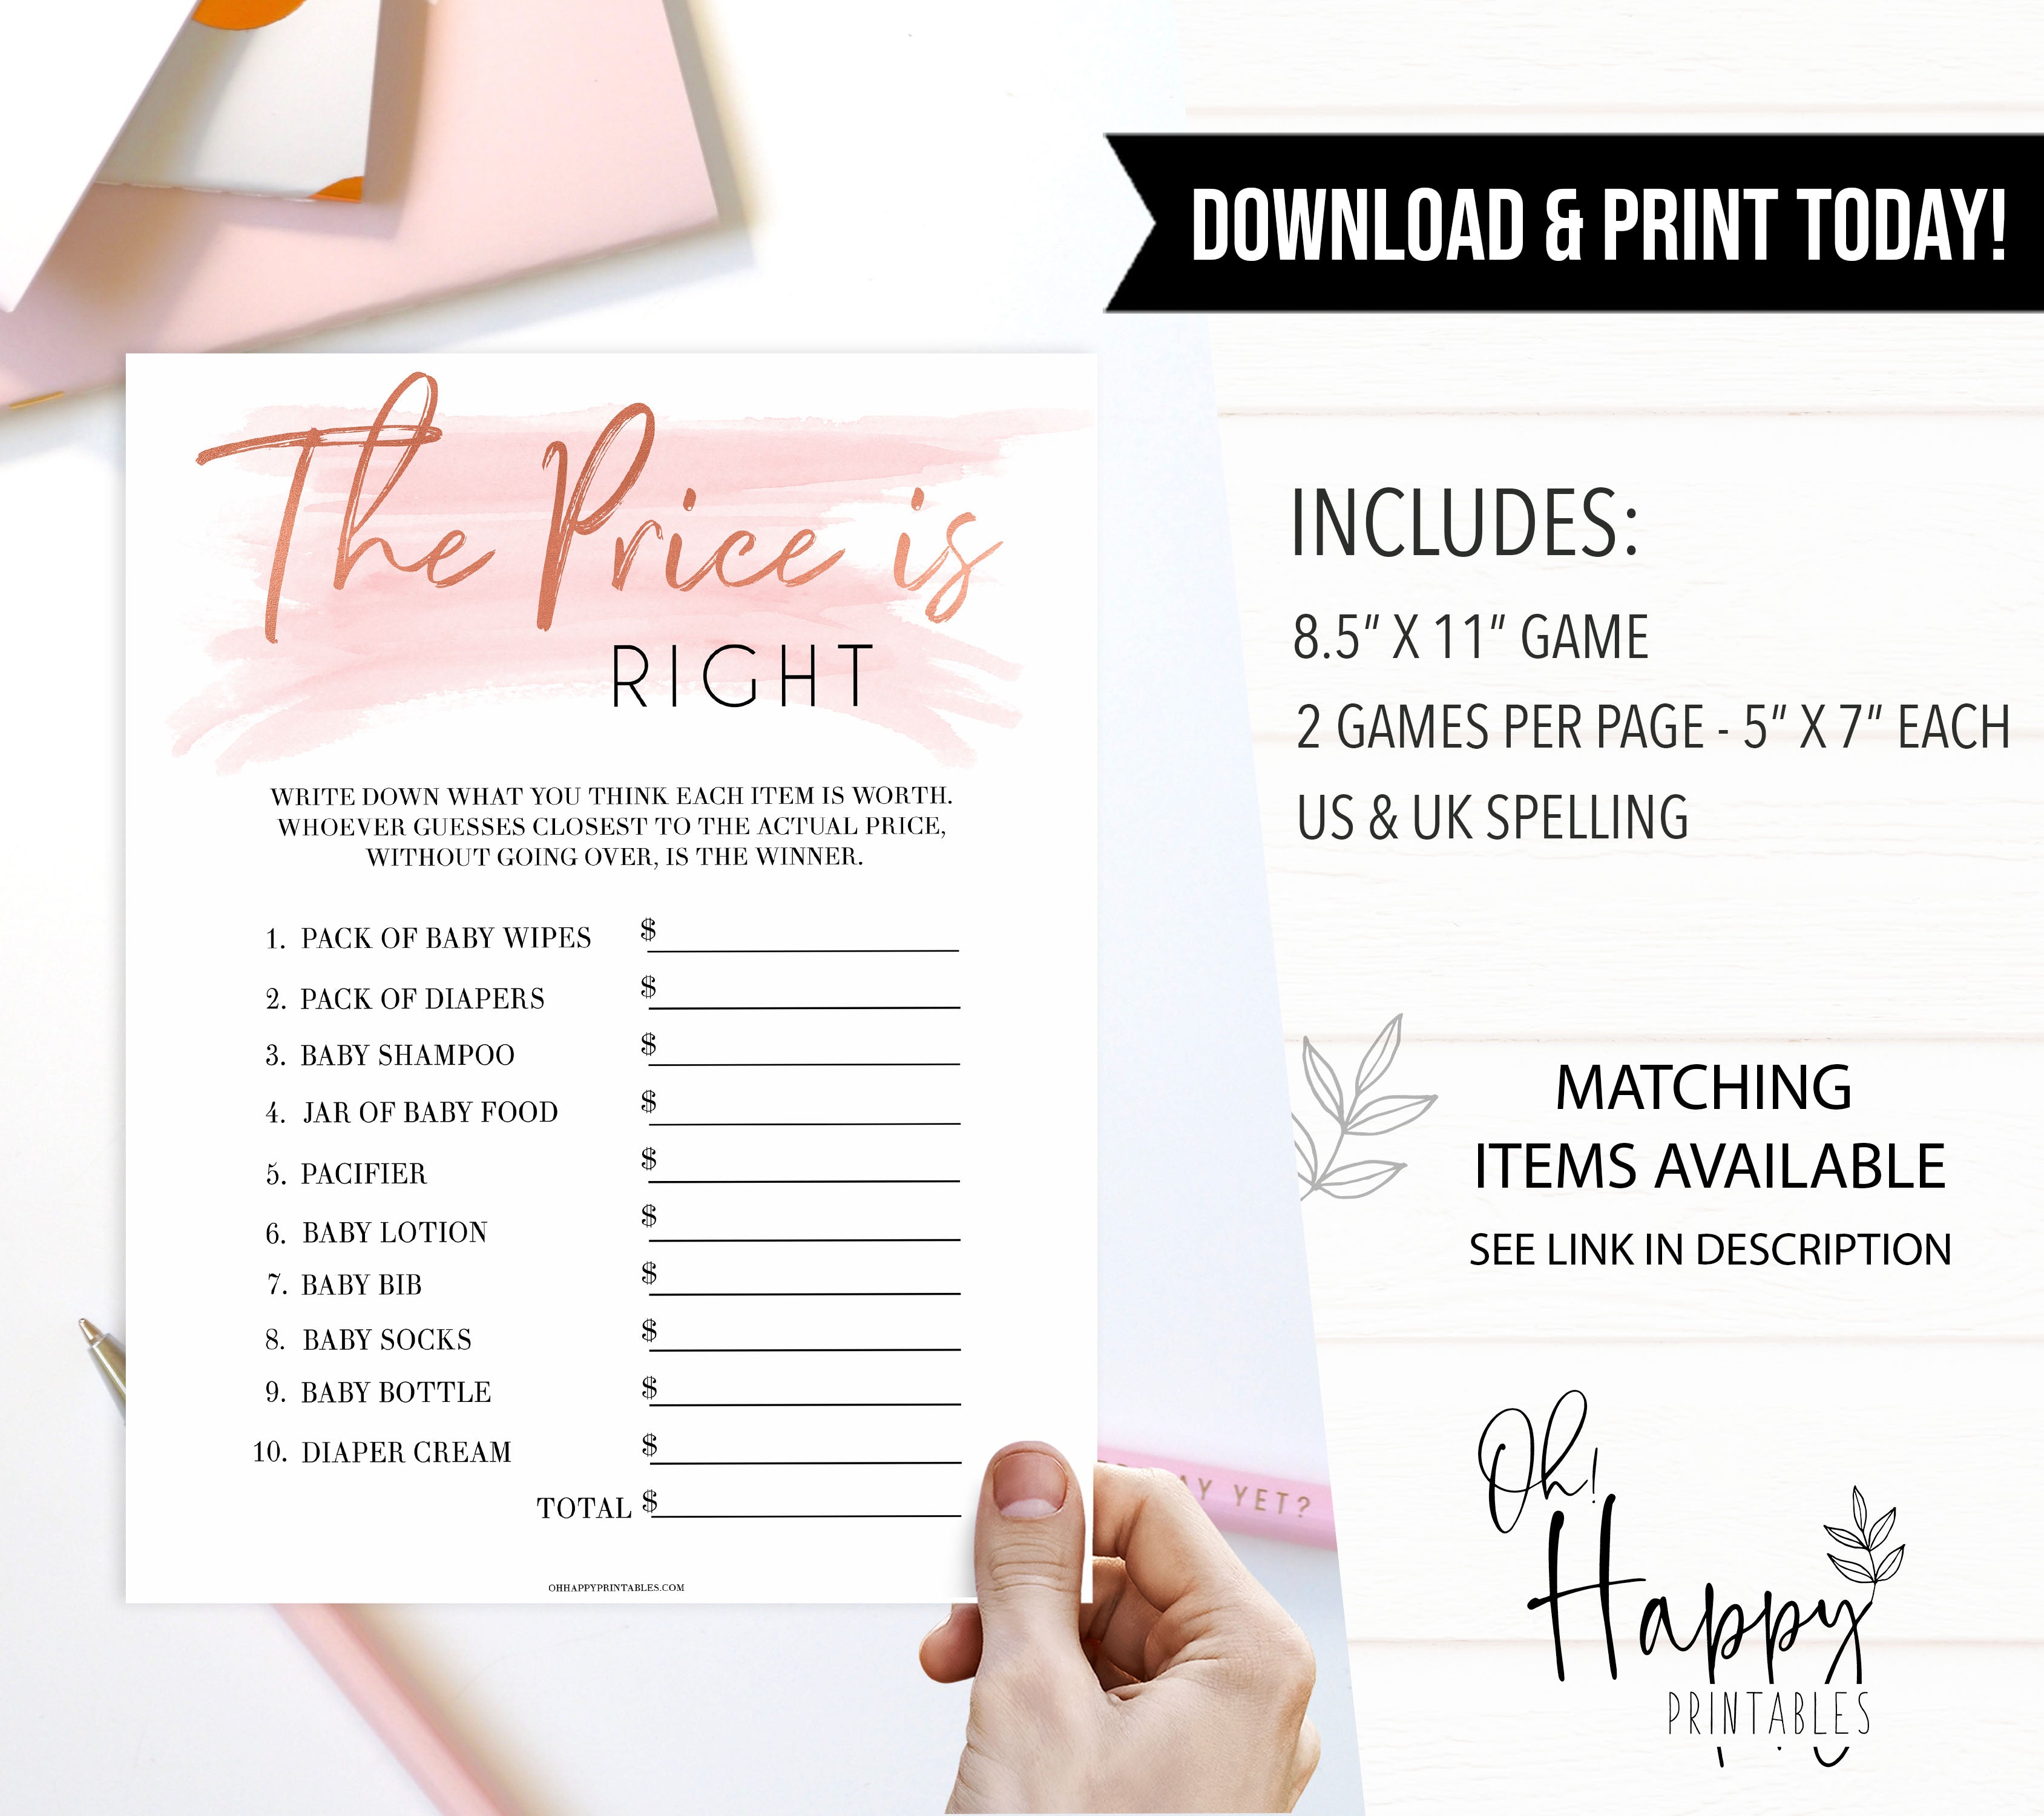 Pink Swash Price Is Right Baby Shower Game, Pink Guess The Price Games, Prinable Baby Shower Games Price Games, Pink Price Is Right Game, popular baby shower games, printable baby shower games, fun baby games